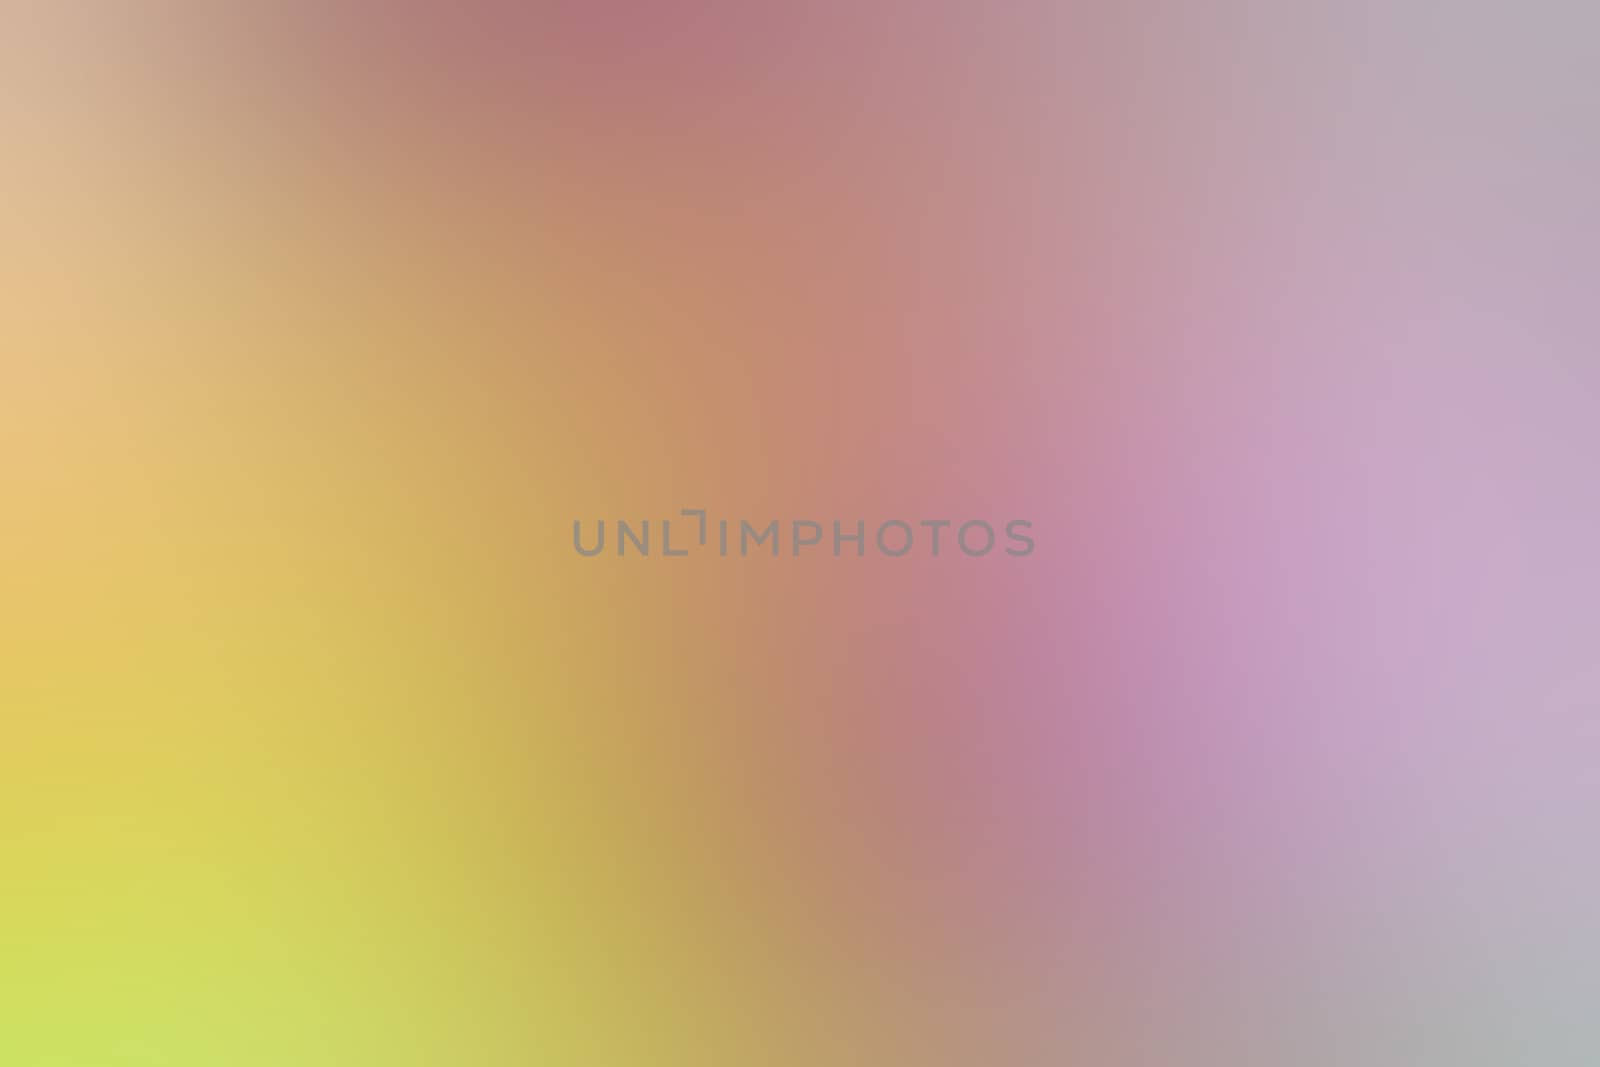 blurred gradient yellow pink hue colorful pastel soft background illustration for cosmetics banner advertising background